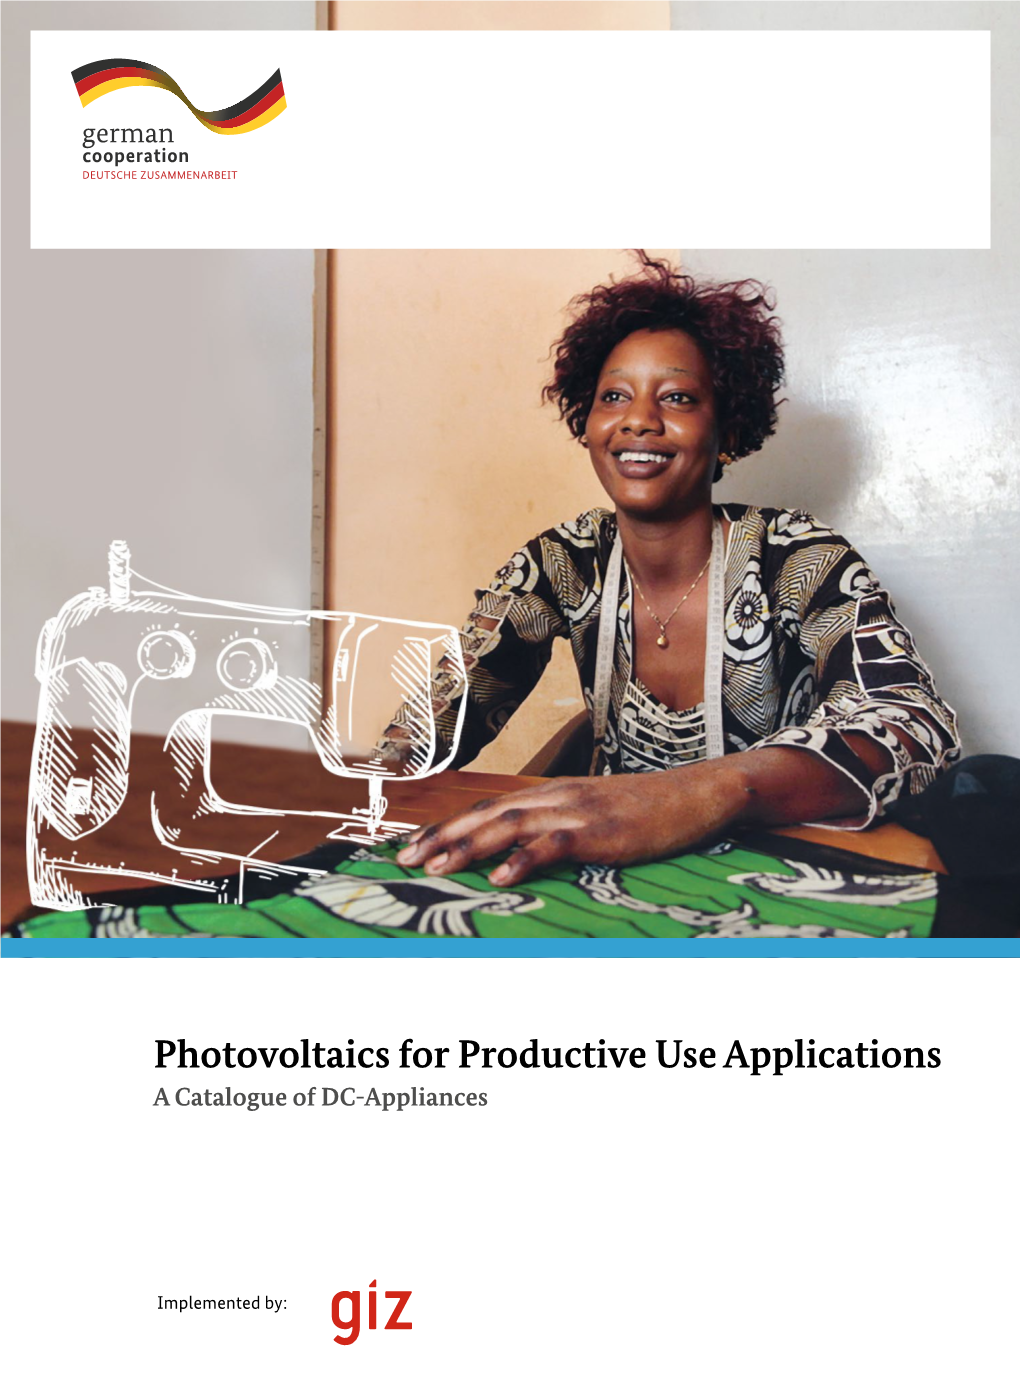 Photovoltaics for Productive Use Applications a Catalogue of DC-Appliances